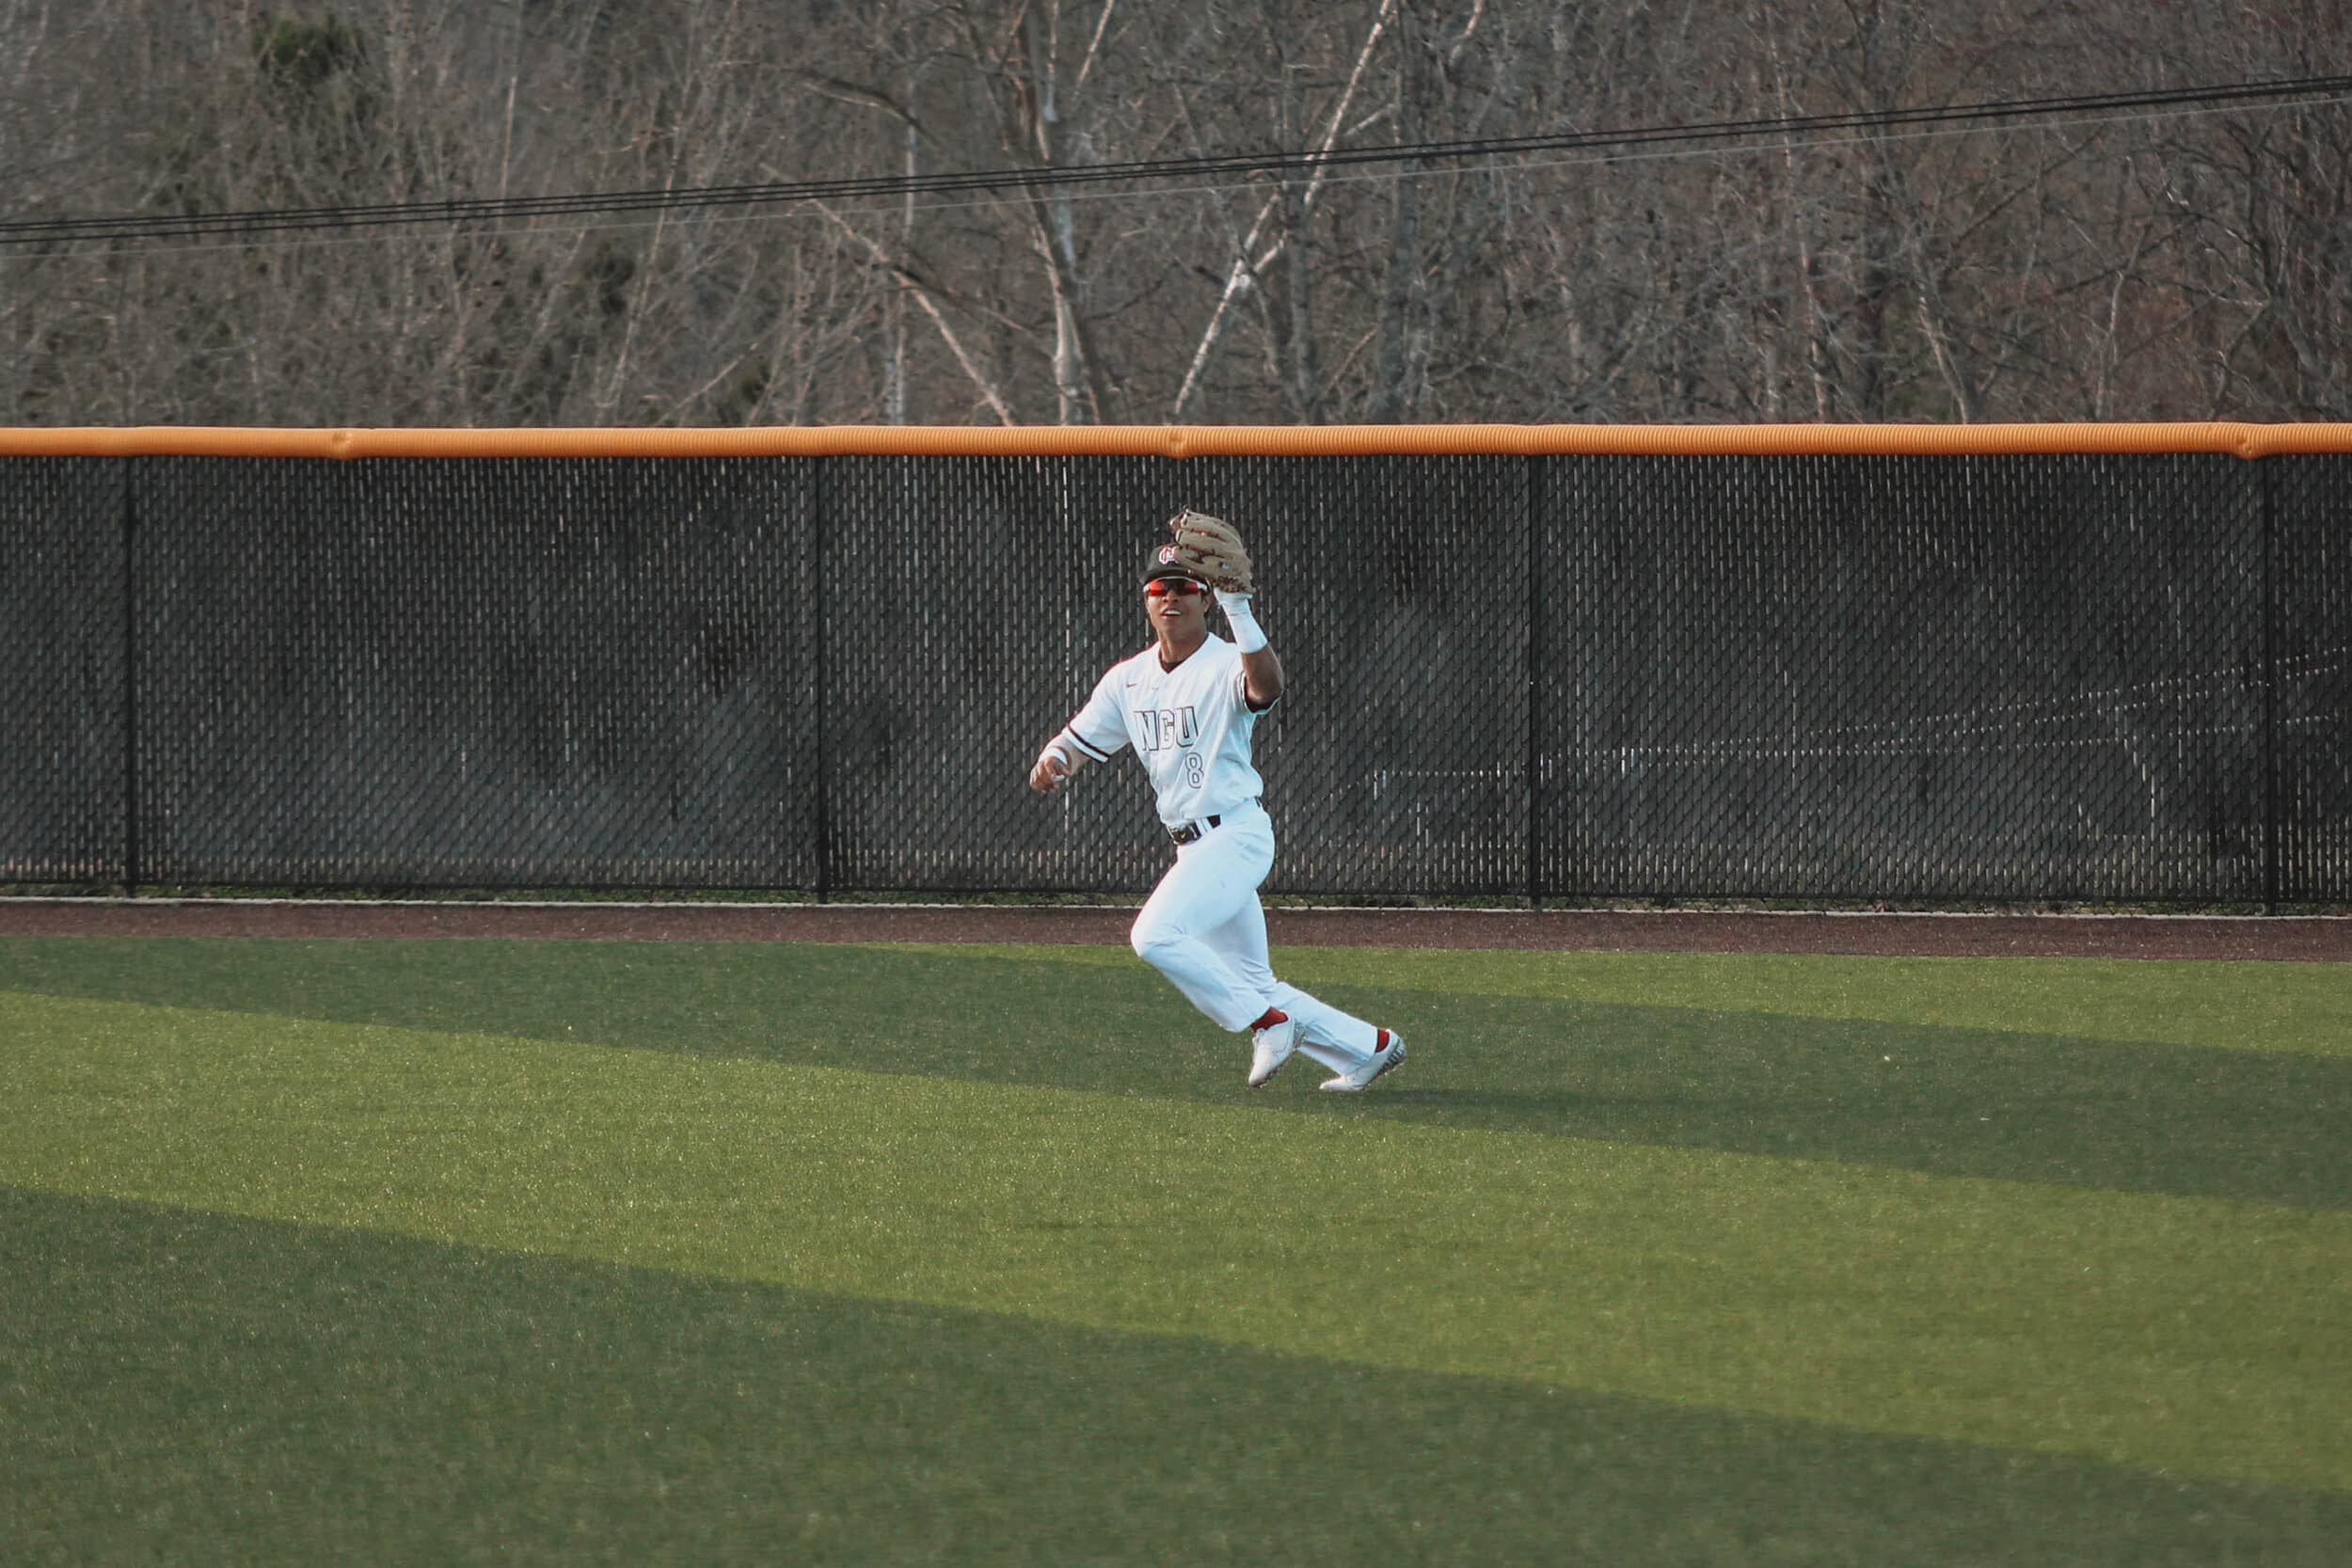 Outfielder, Jeremy Whitehead (8) makes a catch in the outfield getting a Panther player out.